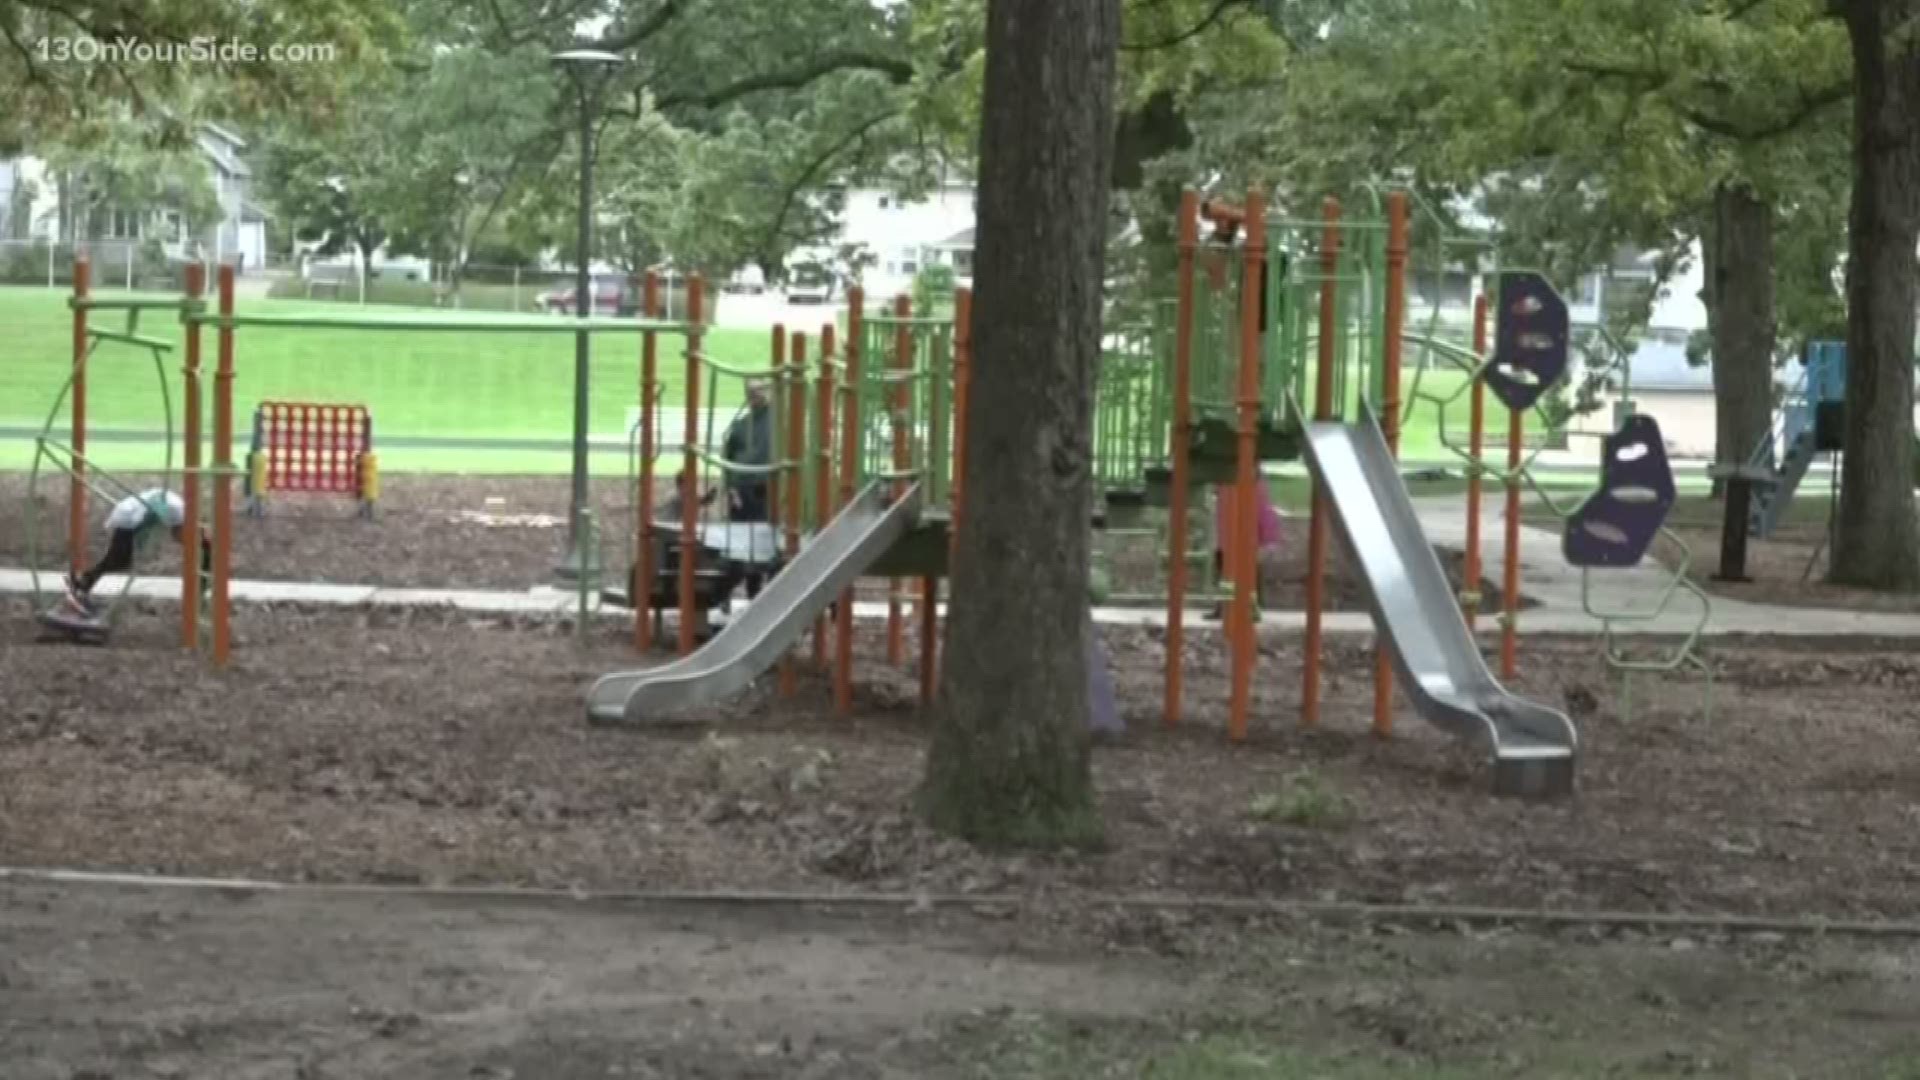 Upgrades were made to the playground and a picnic shelter was added. There are also pathways to make it safer to walk around the Creston neighborhood.